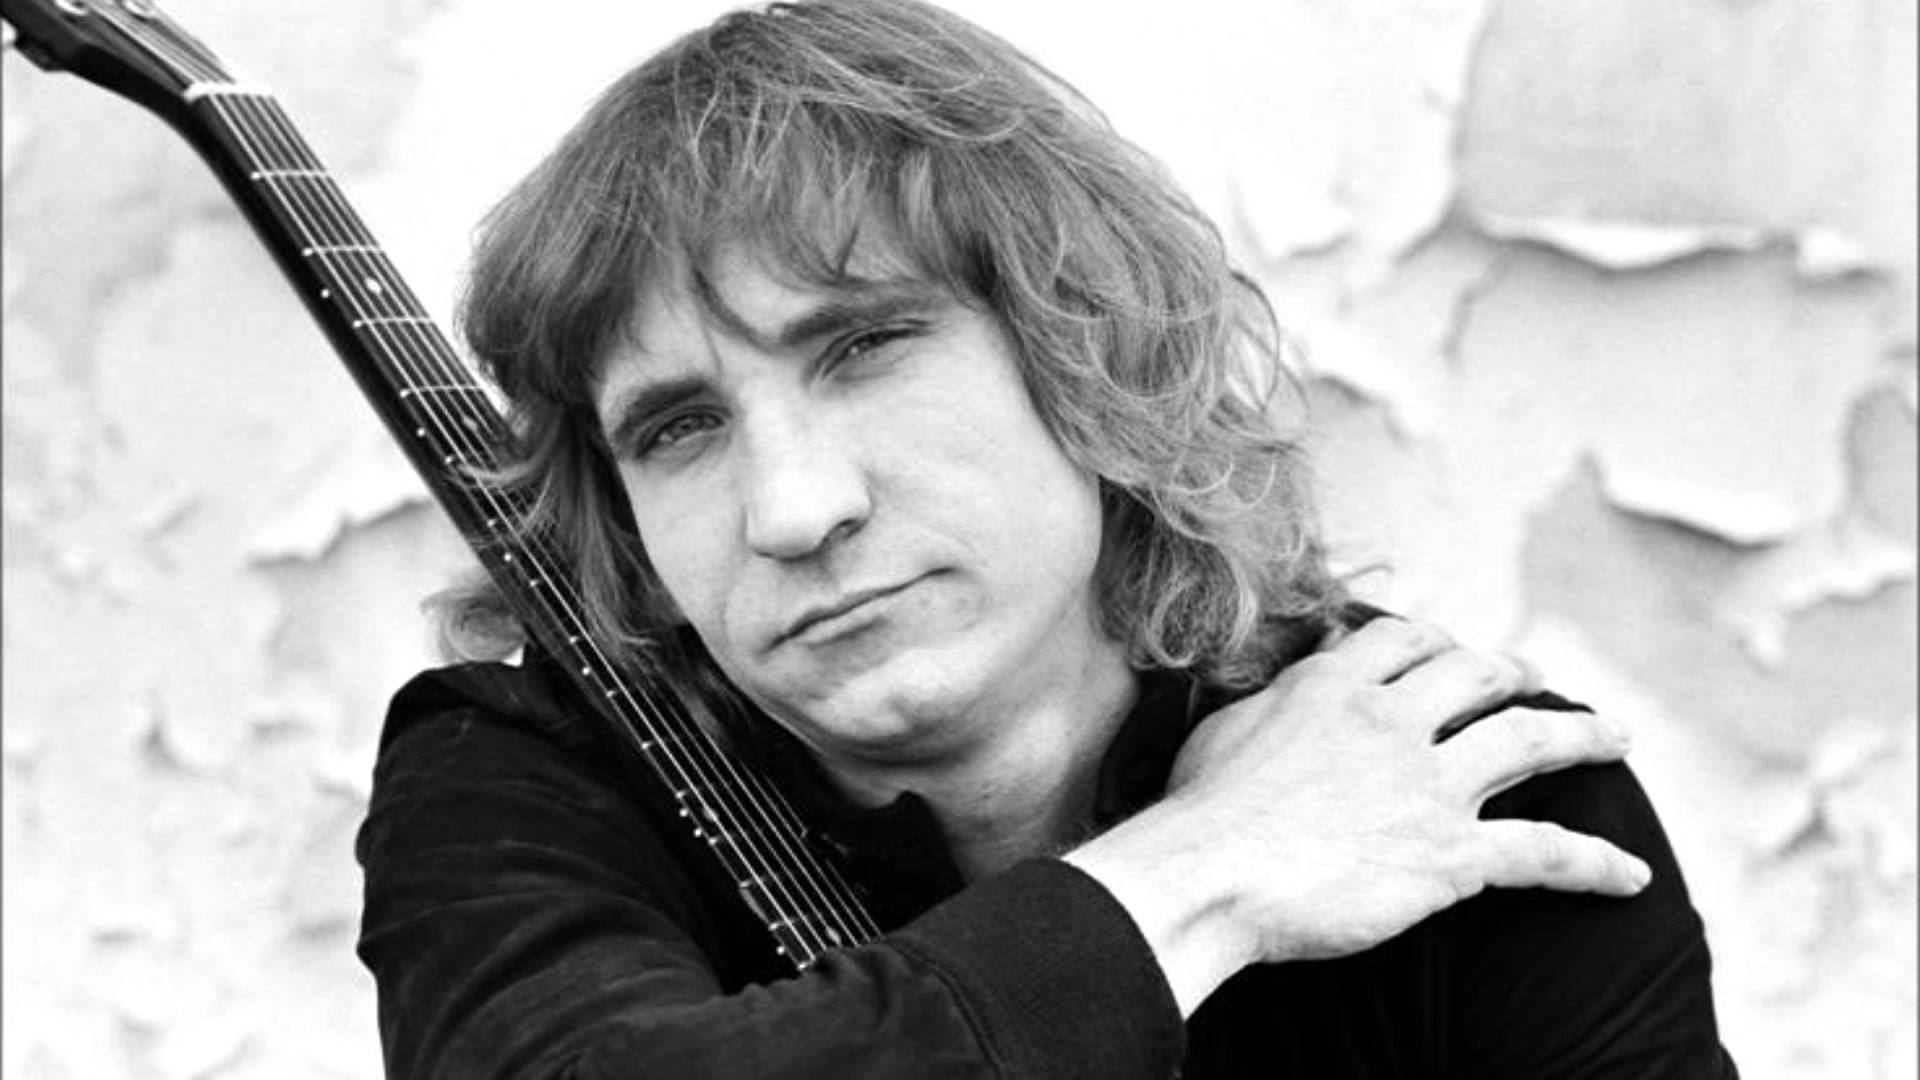 Happy Birthday to a legend and one of my fave musicians Joe Walsh   